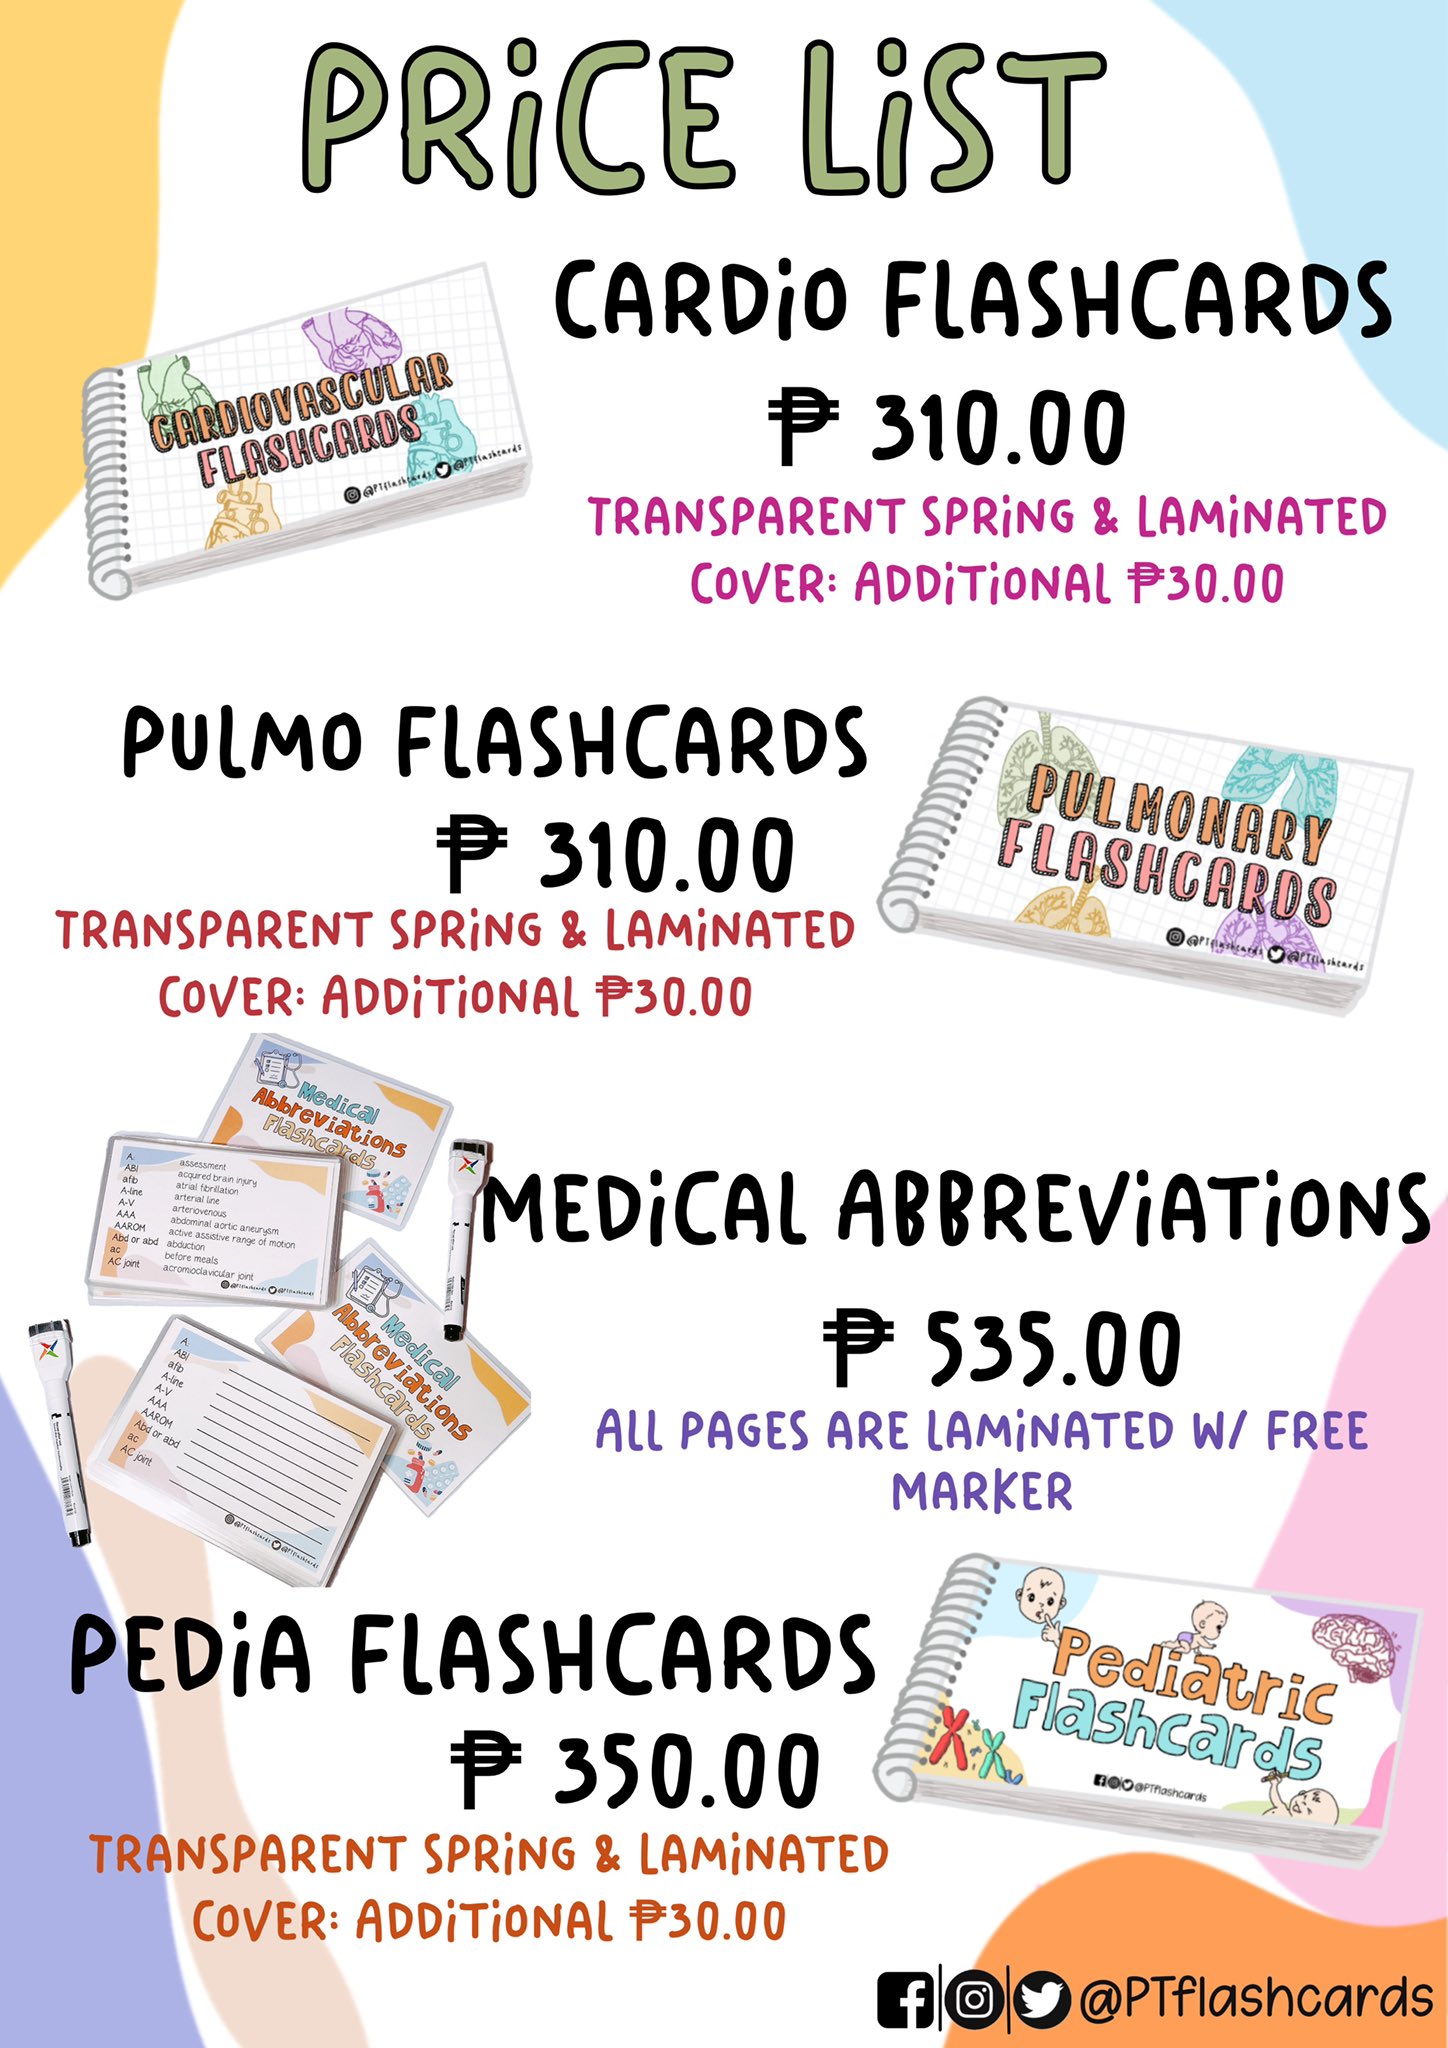 pt-flashcards-on-twitter-updated-price-lists-as-of-06-14-22-dm-us